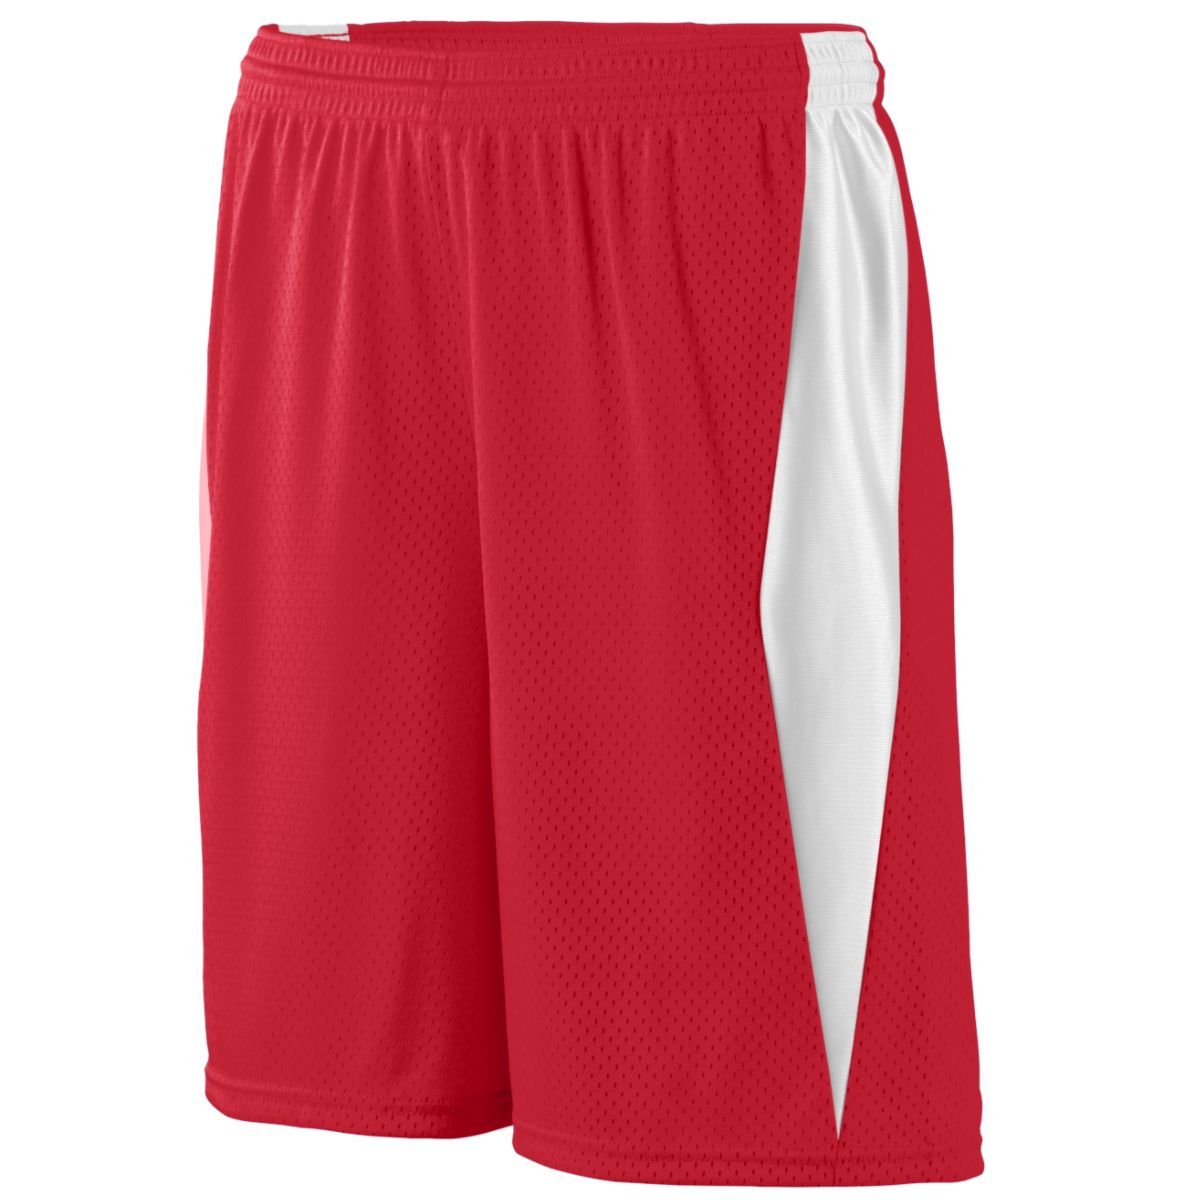 Augusta Sportswear Top Score Shorts in Red/White  -Part of the Adult, Adult-Shorts, Augusta-Products, Lacrosse, All-Sports, All-Sports-1 product lines at KanaleyCreations.com